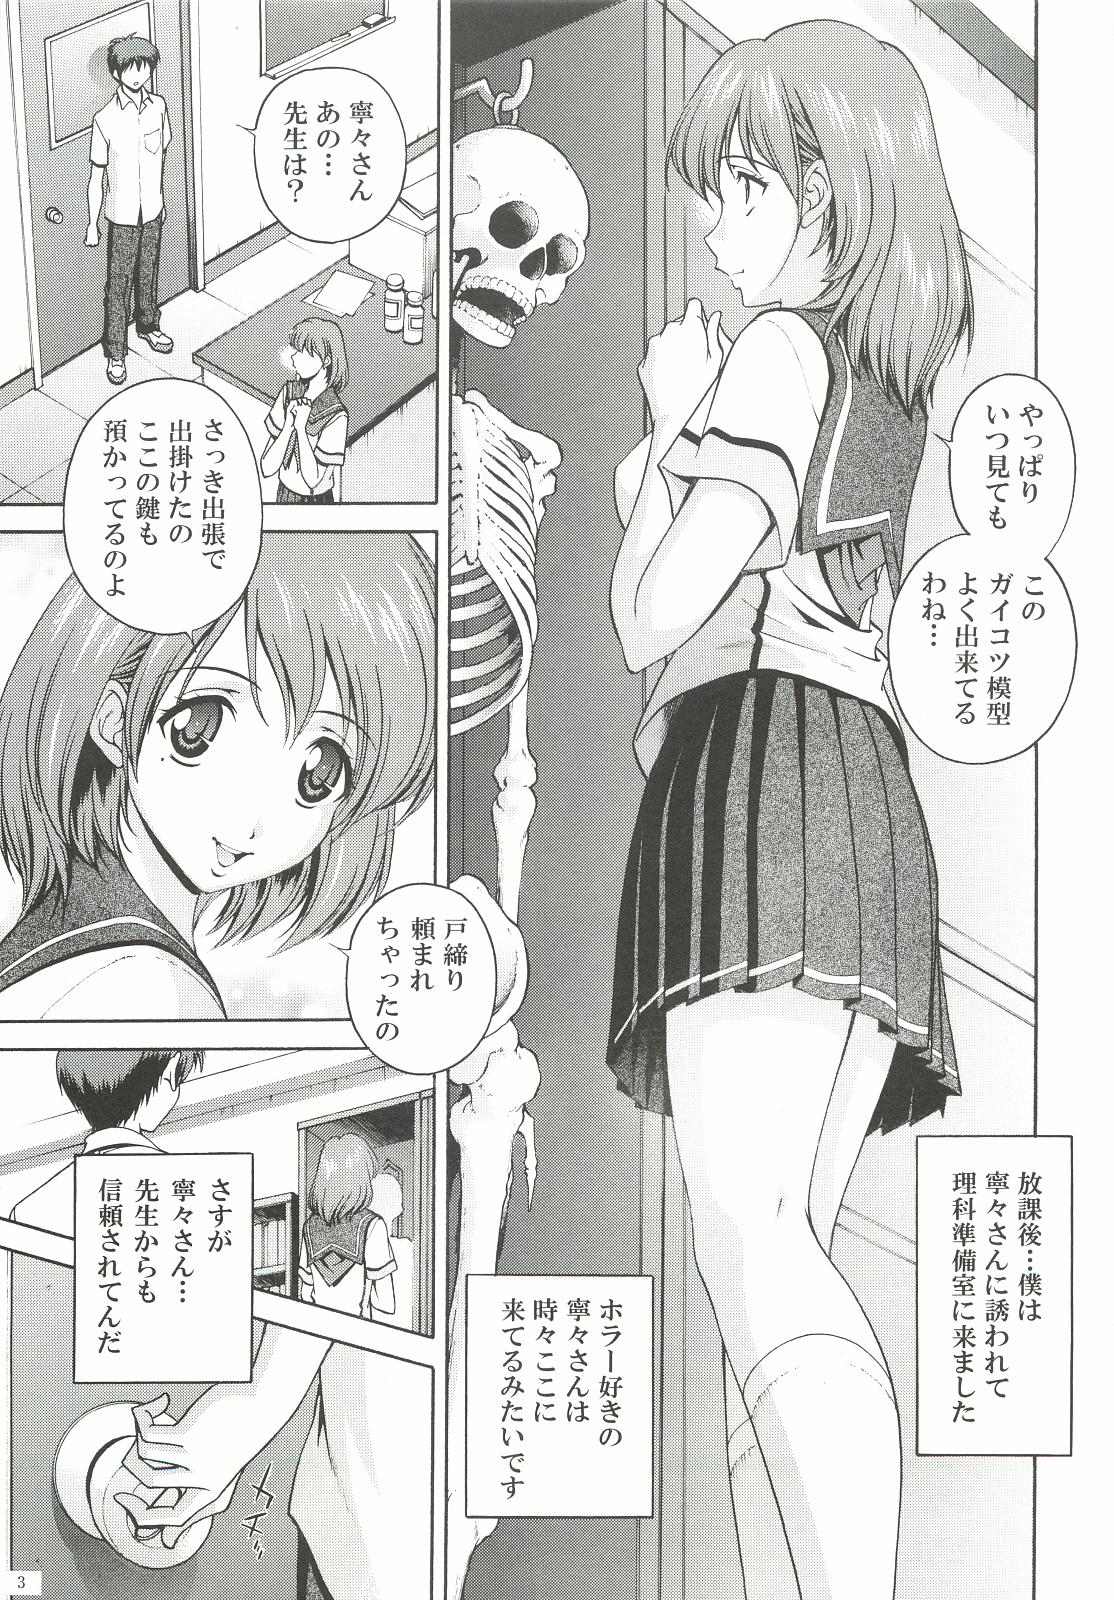 Weird Oneesan to Issho - Love plus Glasses - Page 2